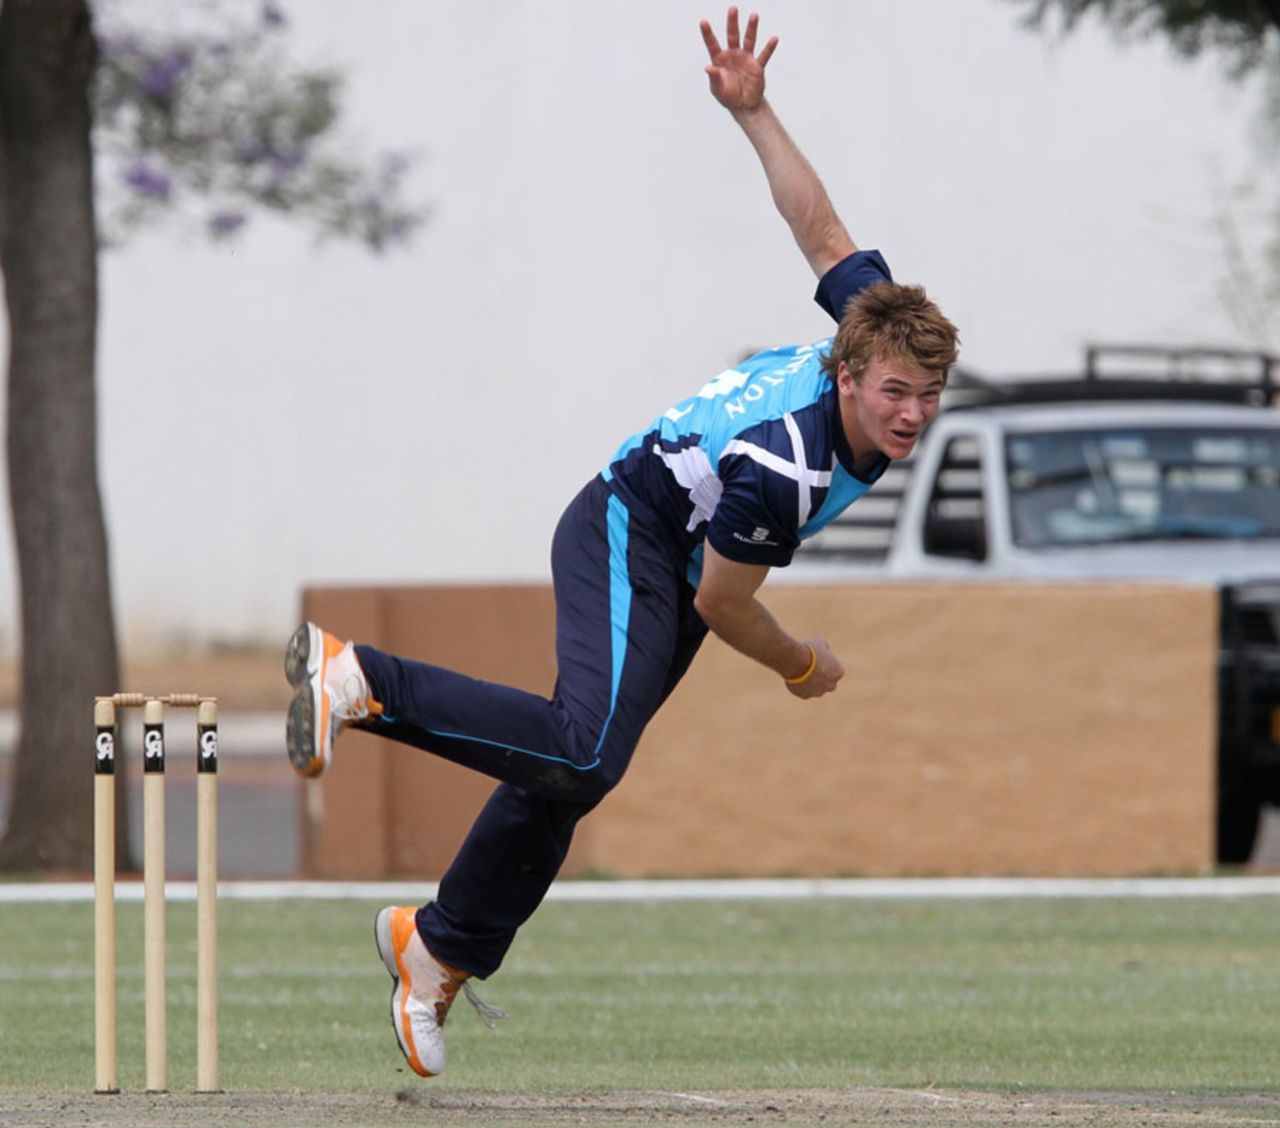 Richie Berrington in his delivery stride, Namibia v Scotland, Intercontinental Cup ODI, Windhoek, September 28, 2011